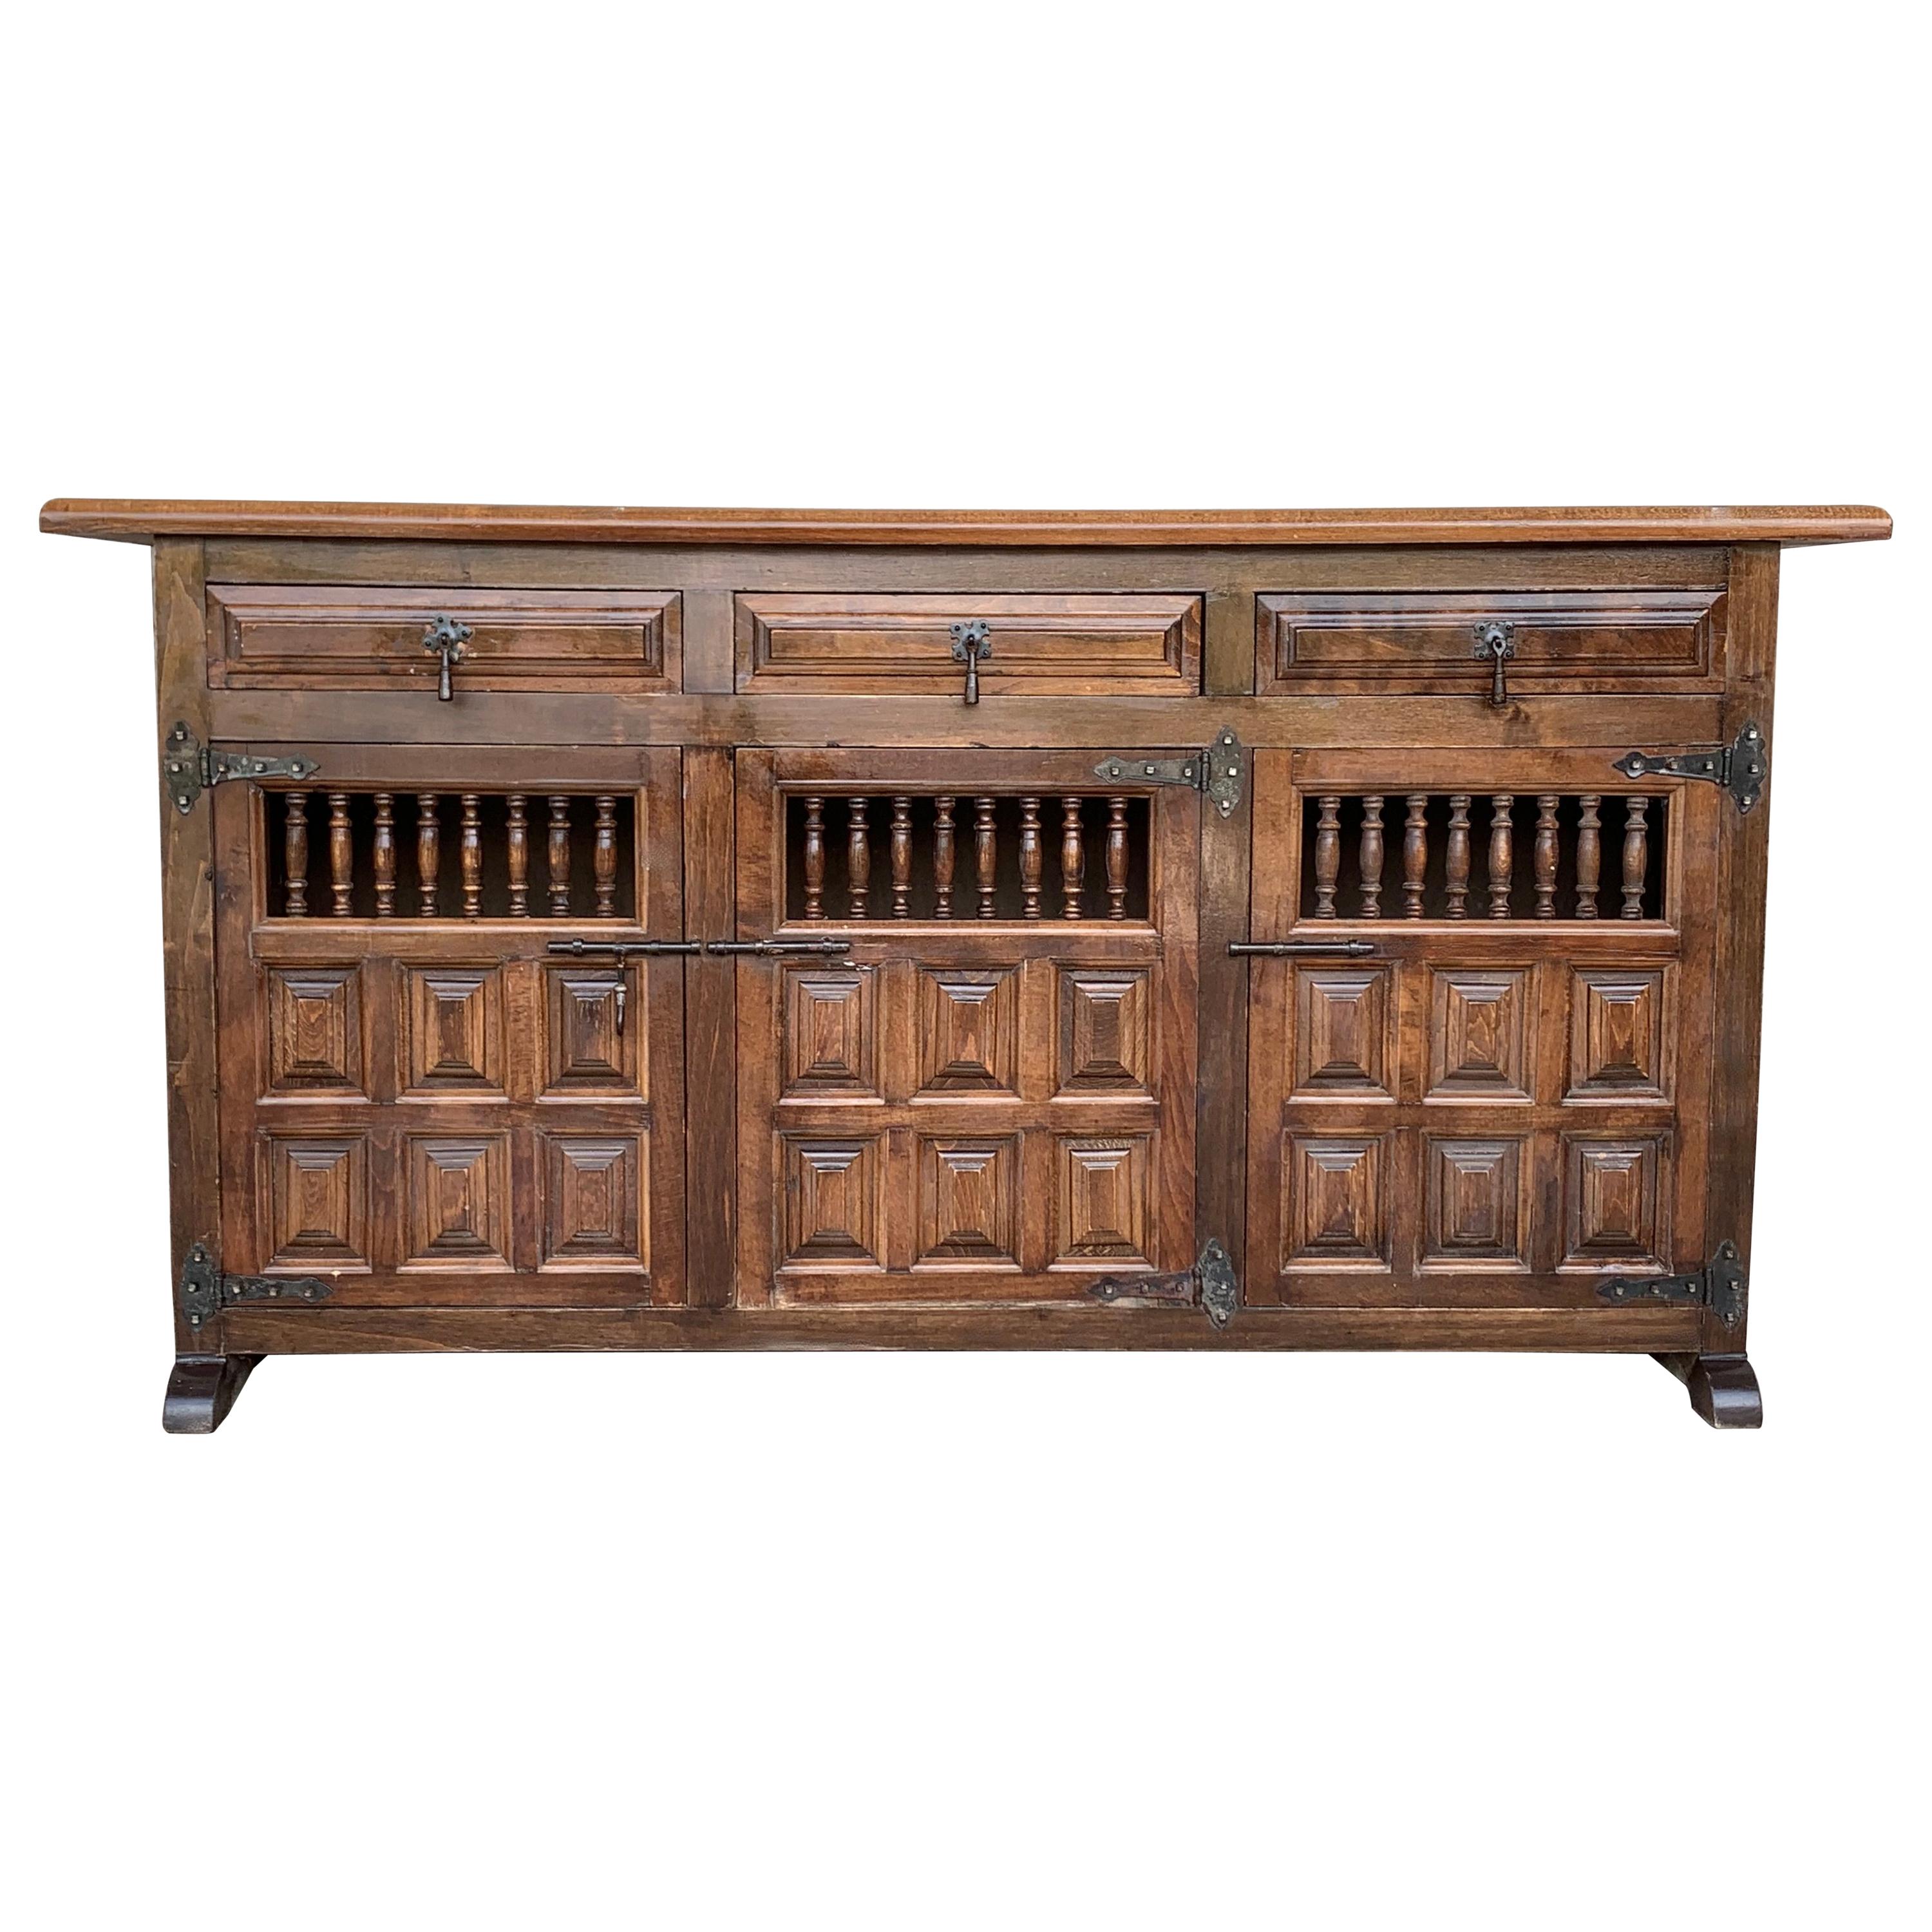 20th Century Large Catalan Spanish Baroque Carved Oak Tuscan Credenza or Buffet